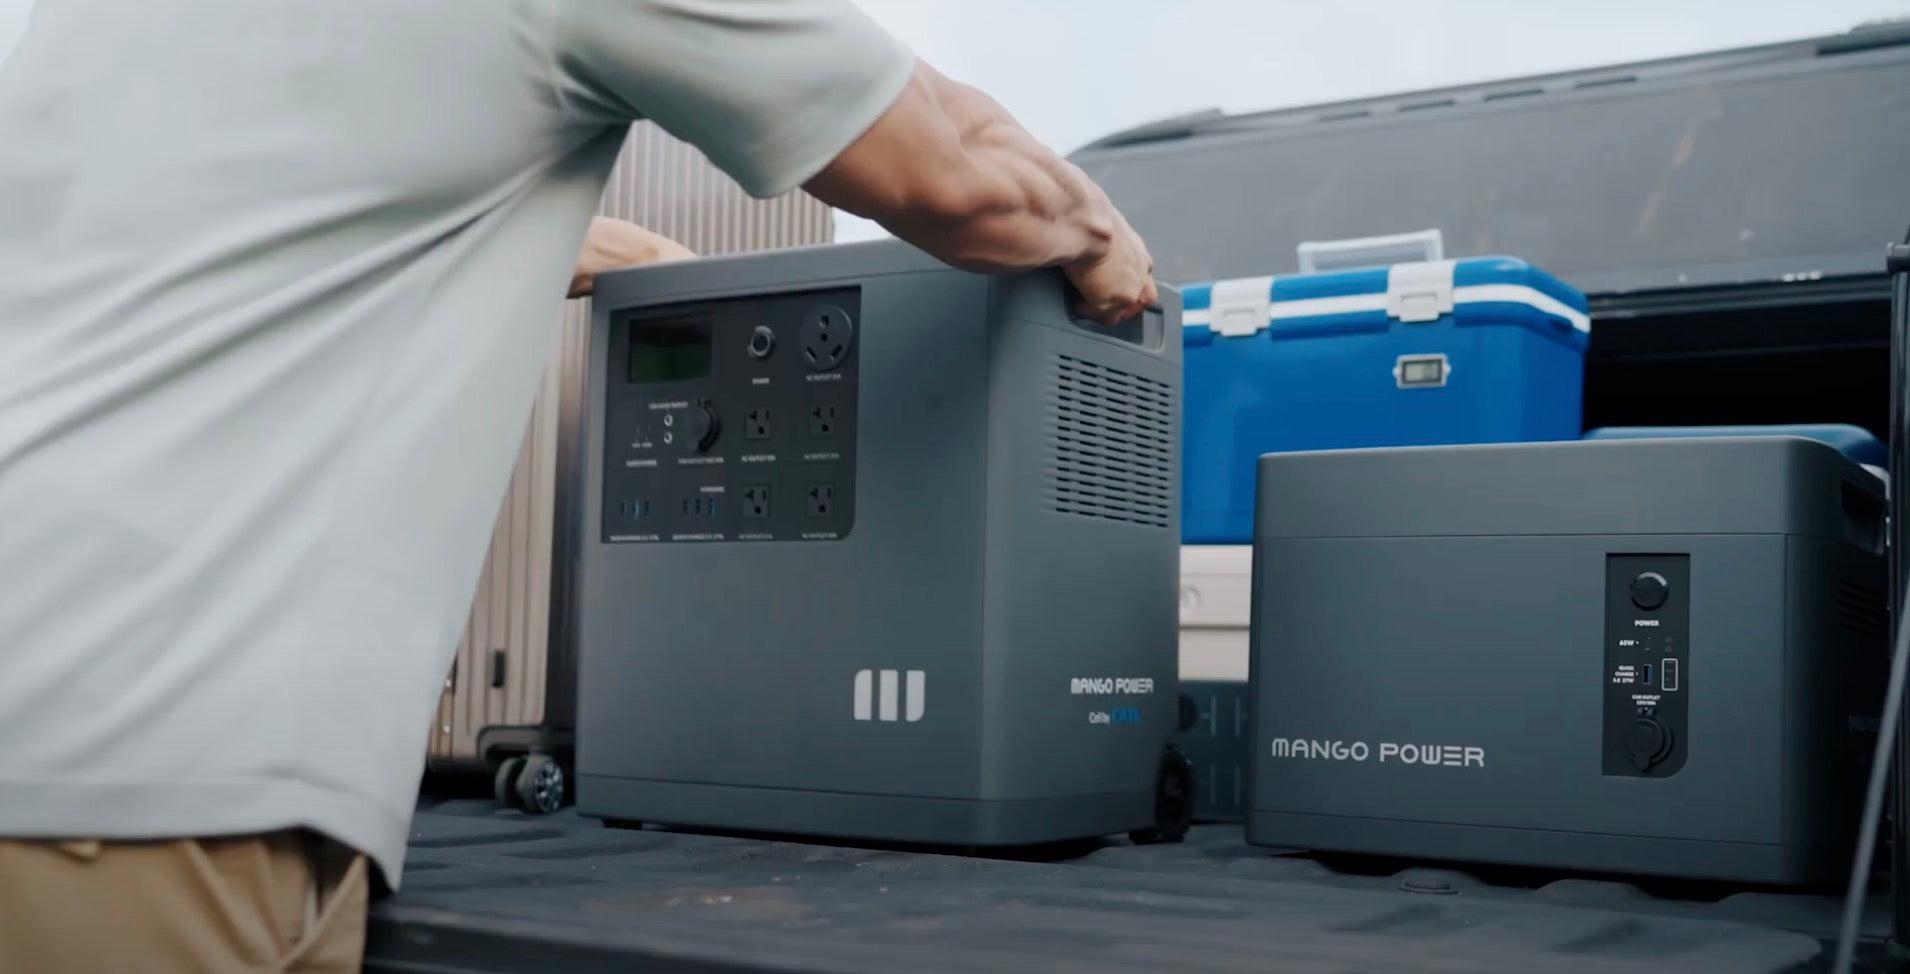 Load video: Manga Power E is a high-end, portable micro-grid power station that users can take on the go, allowing them to power their outdoor excursions, camping trips, and any other outdoor activity. 3.5 - 14 kWh Battery Capacity3-6 kW Power Output5-Year WarrantyBest CATL LFP Battery Cells